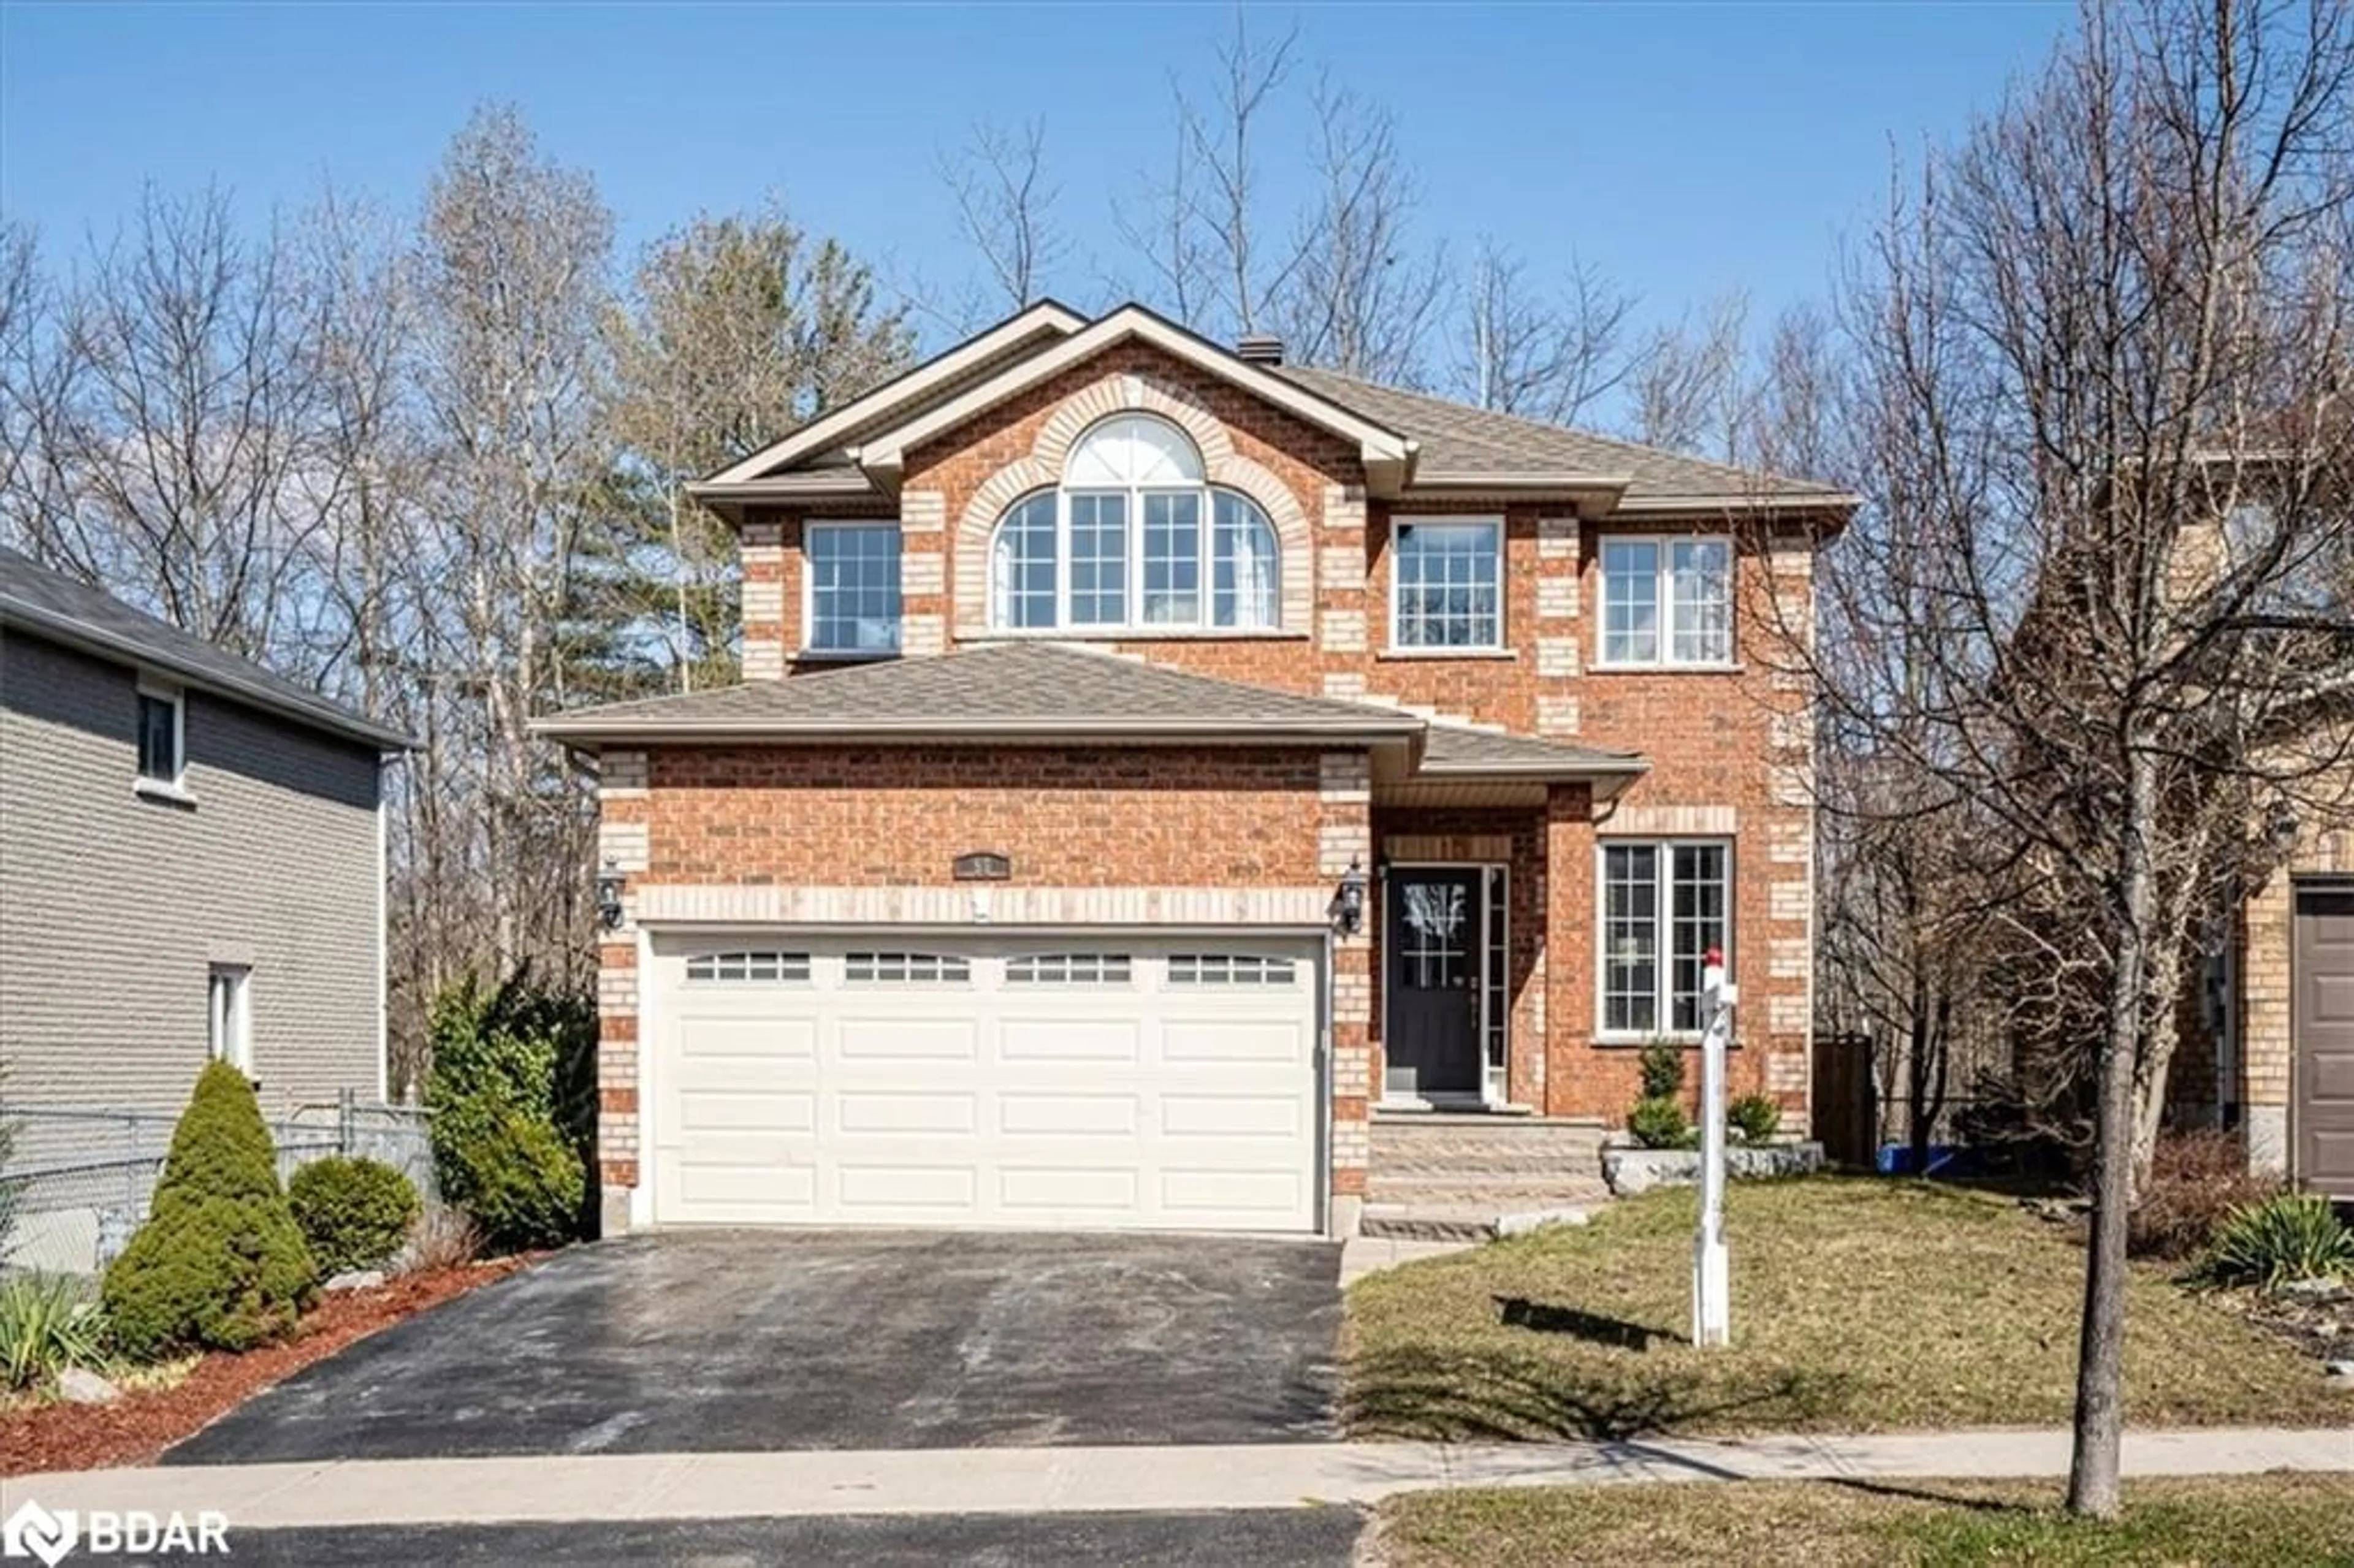 Home with brick exterior material for 95 Nicholson Dr, Barrie Ontario L4N 9L7